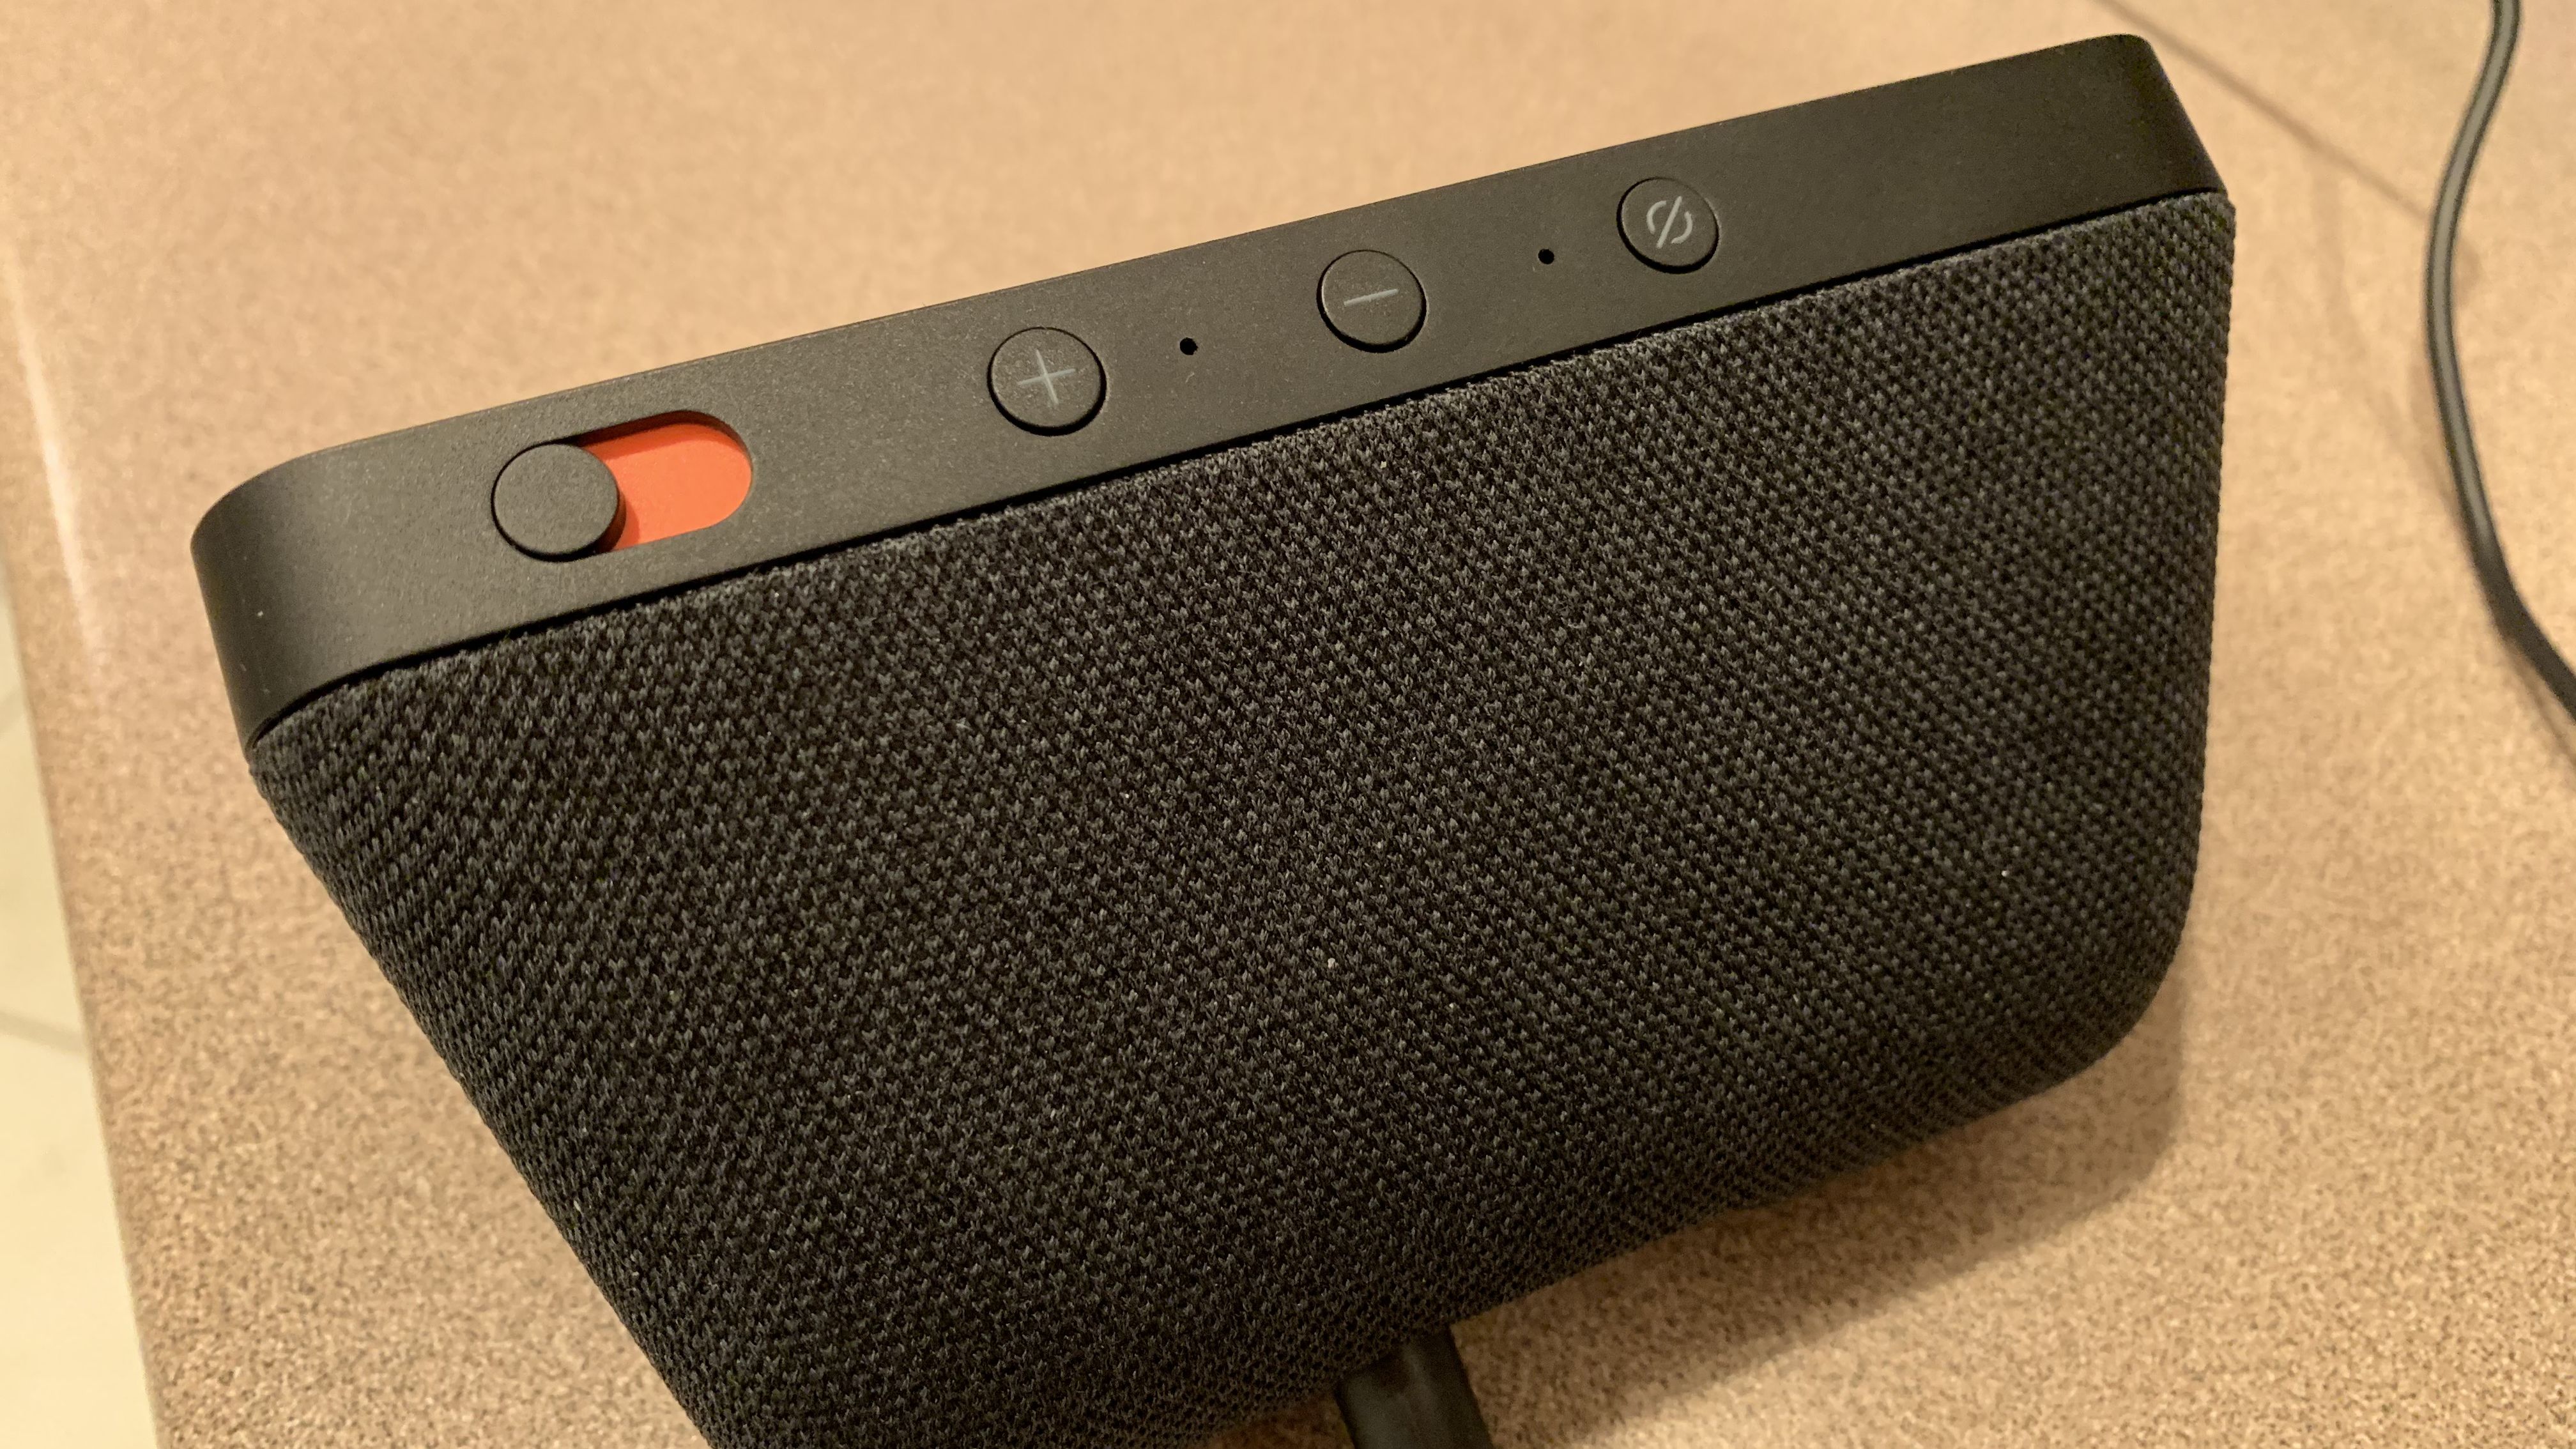 Echo Show 5 review: An impressive compact smart speaker at